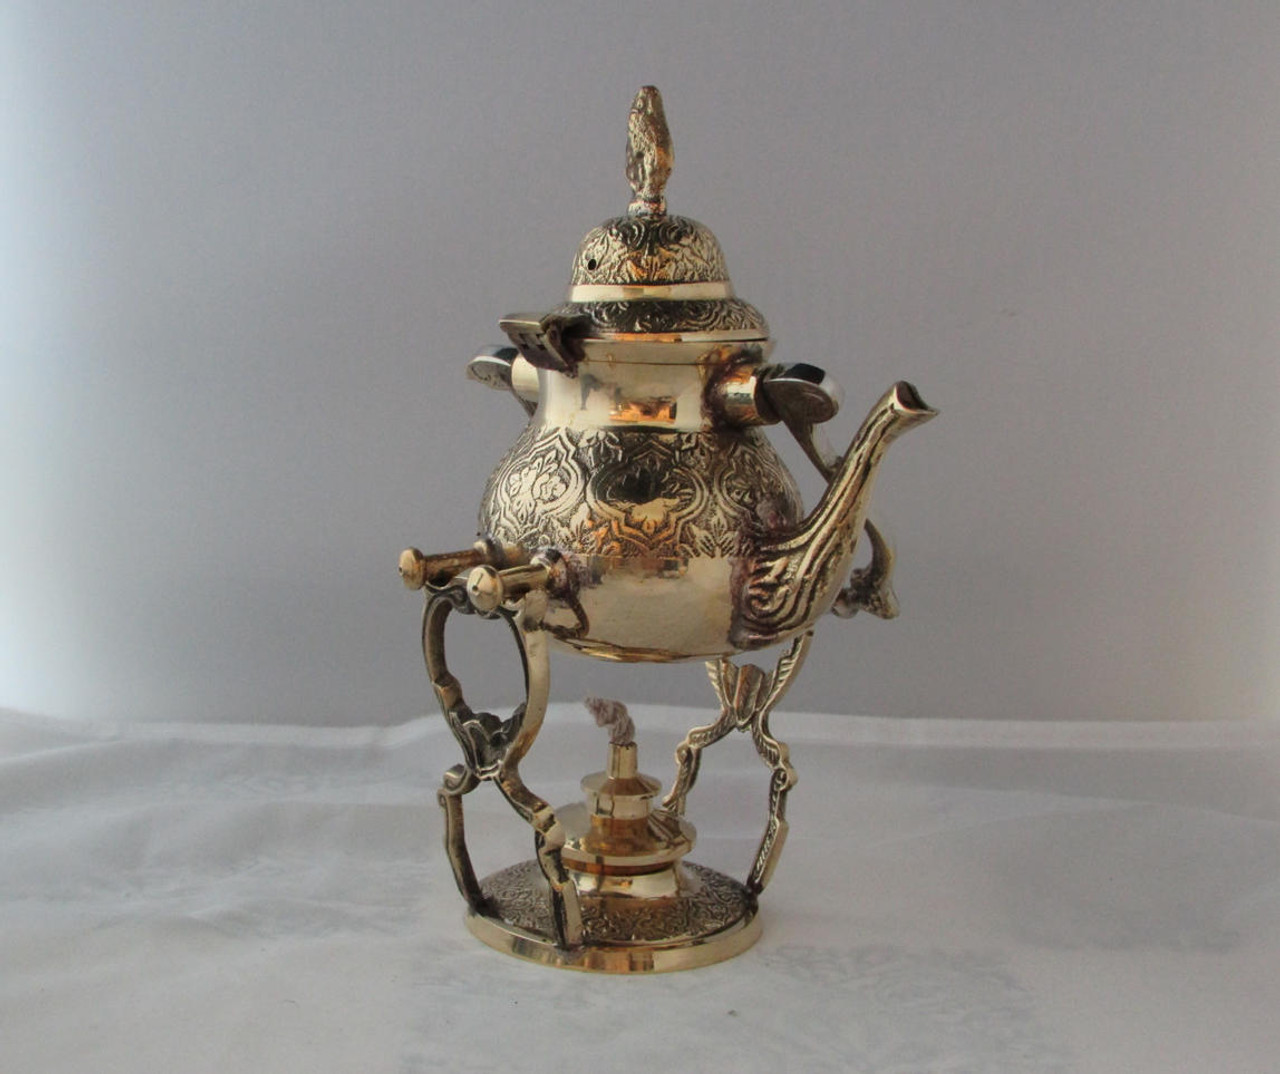 Vintage Brass Teapot on Stand Warmer - Unique Gift Idea